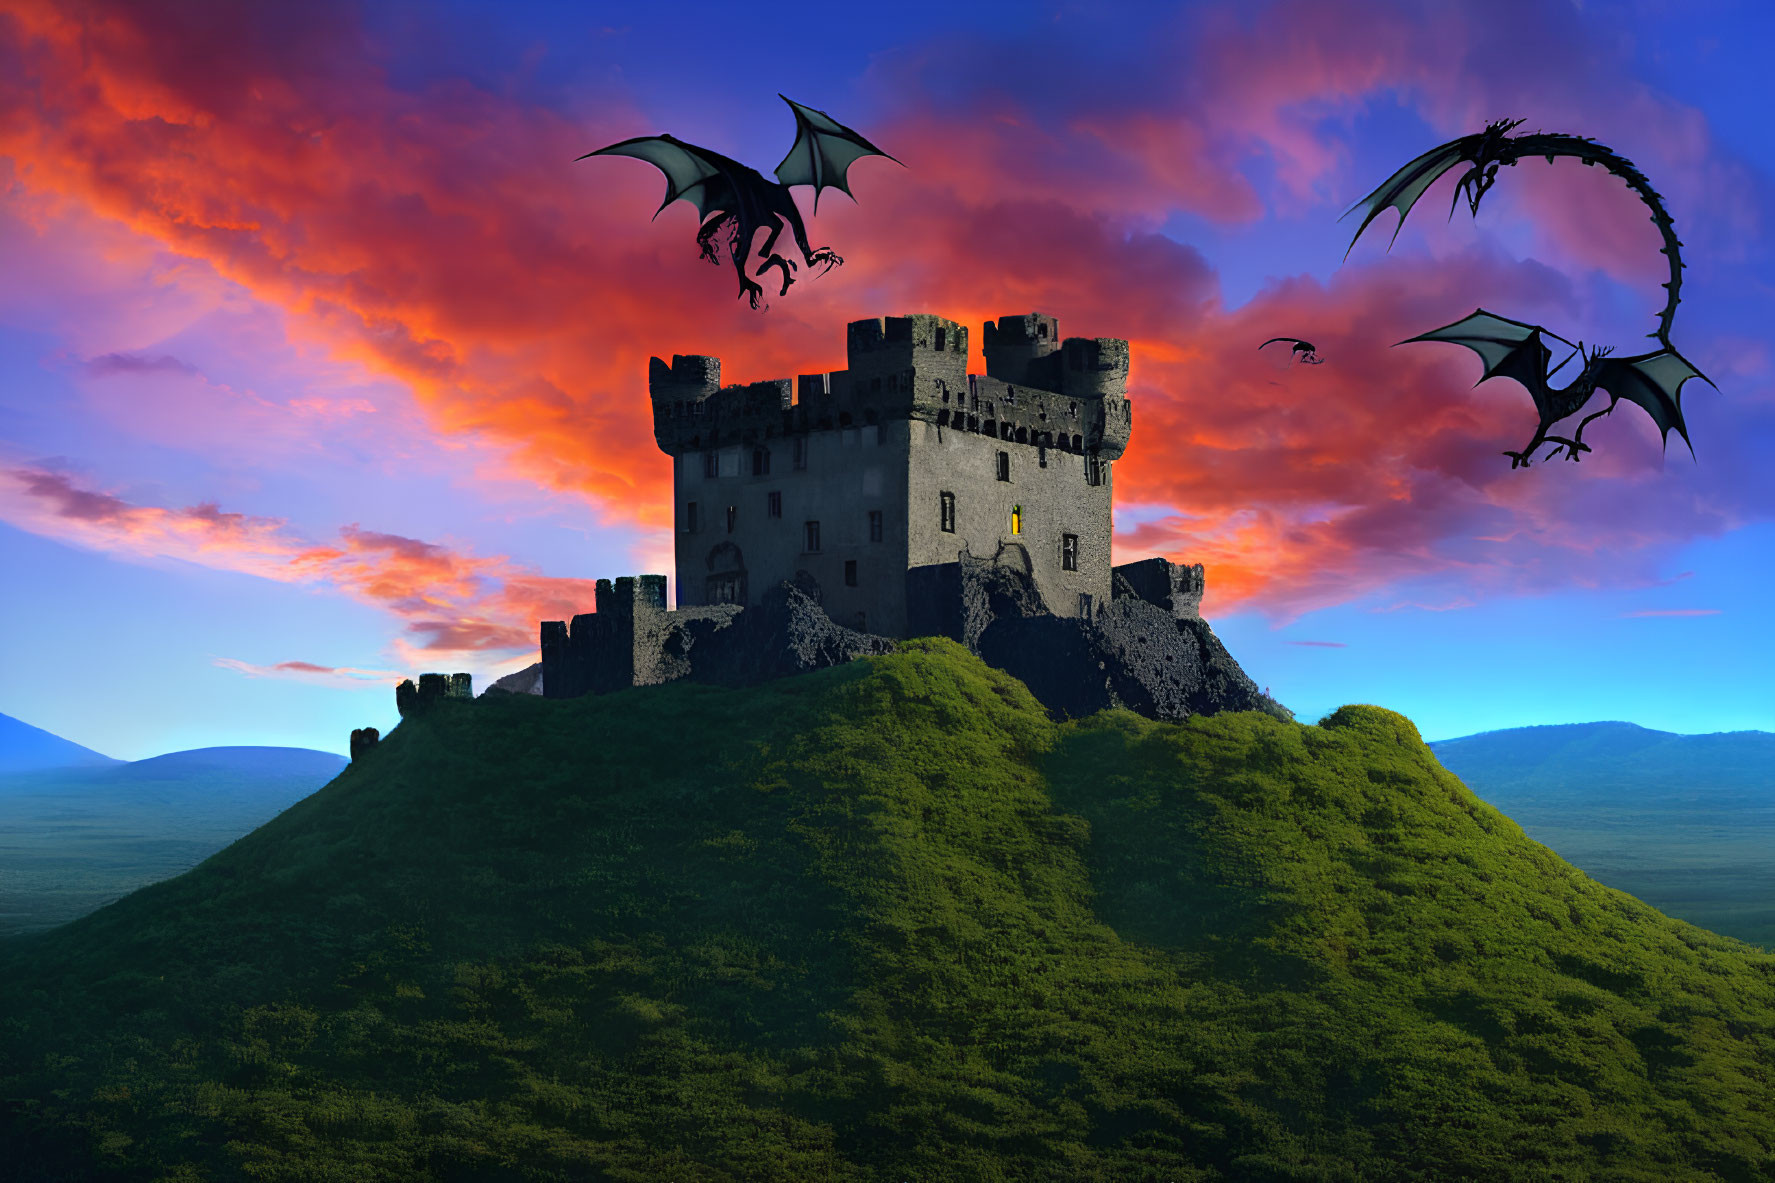 Medieval castle on green hill with dragons in dramatic sunset sky